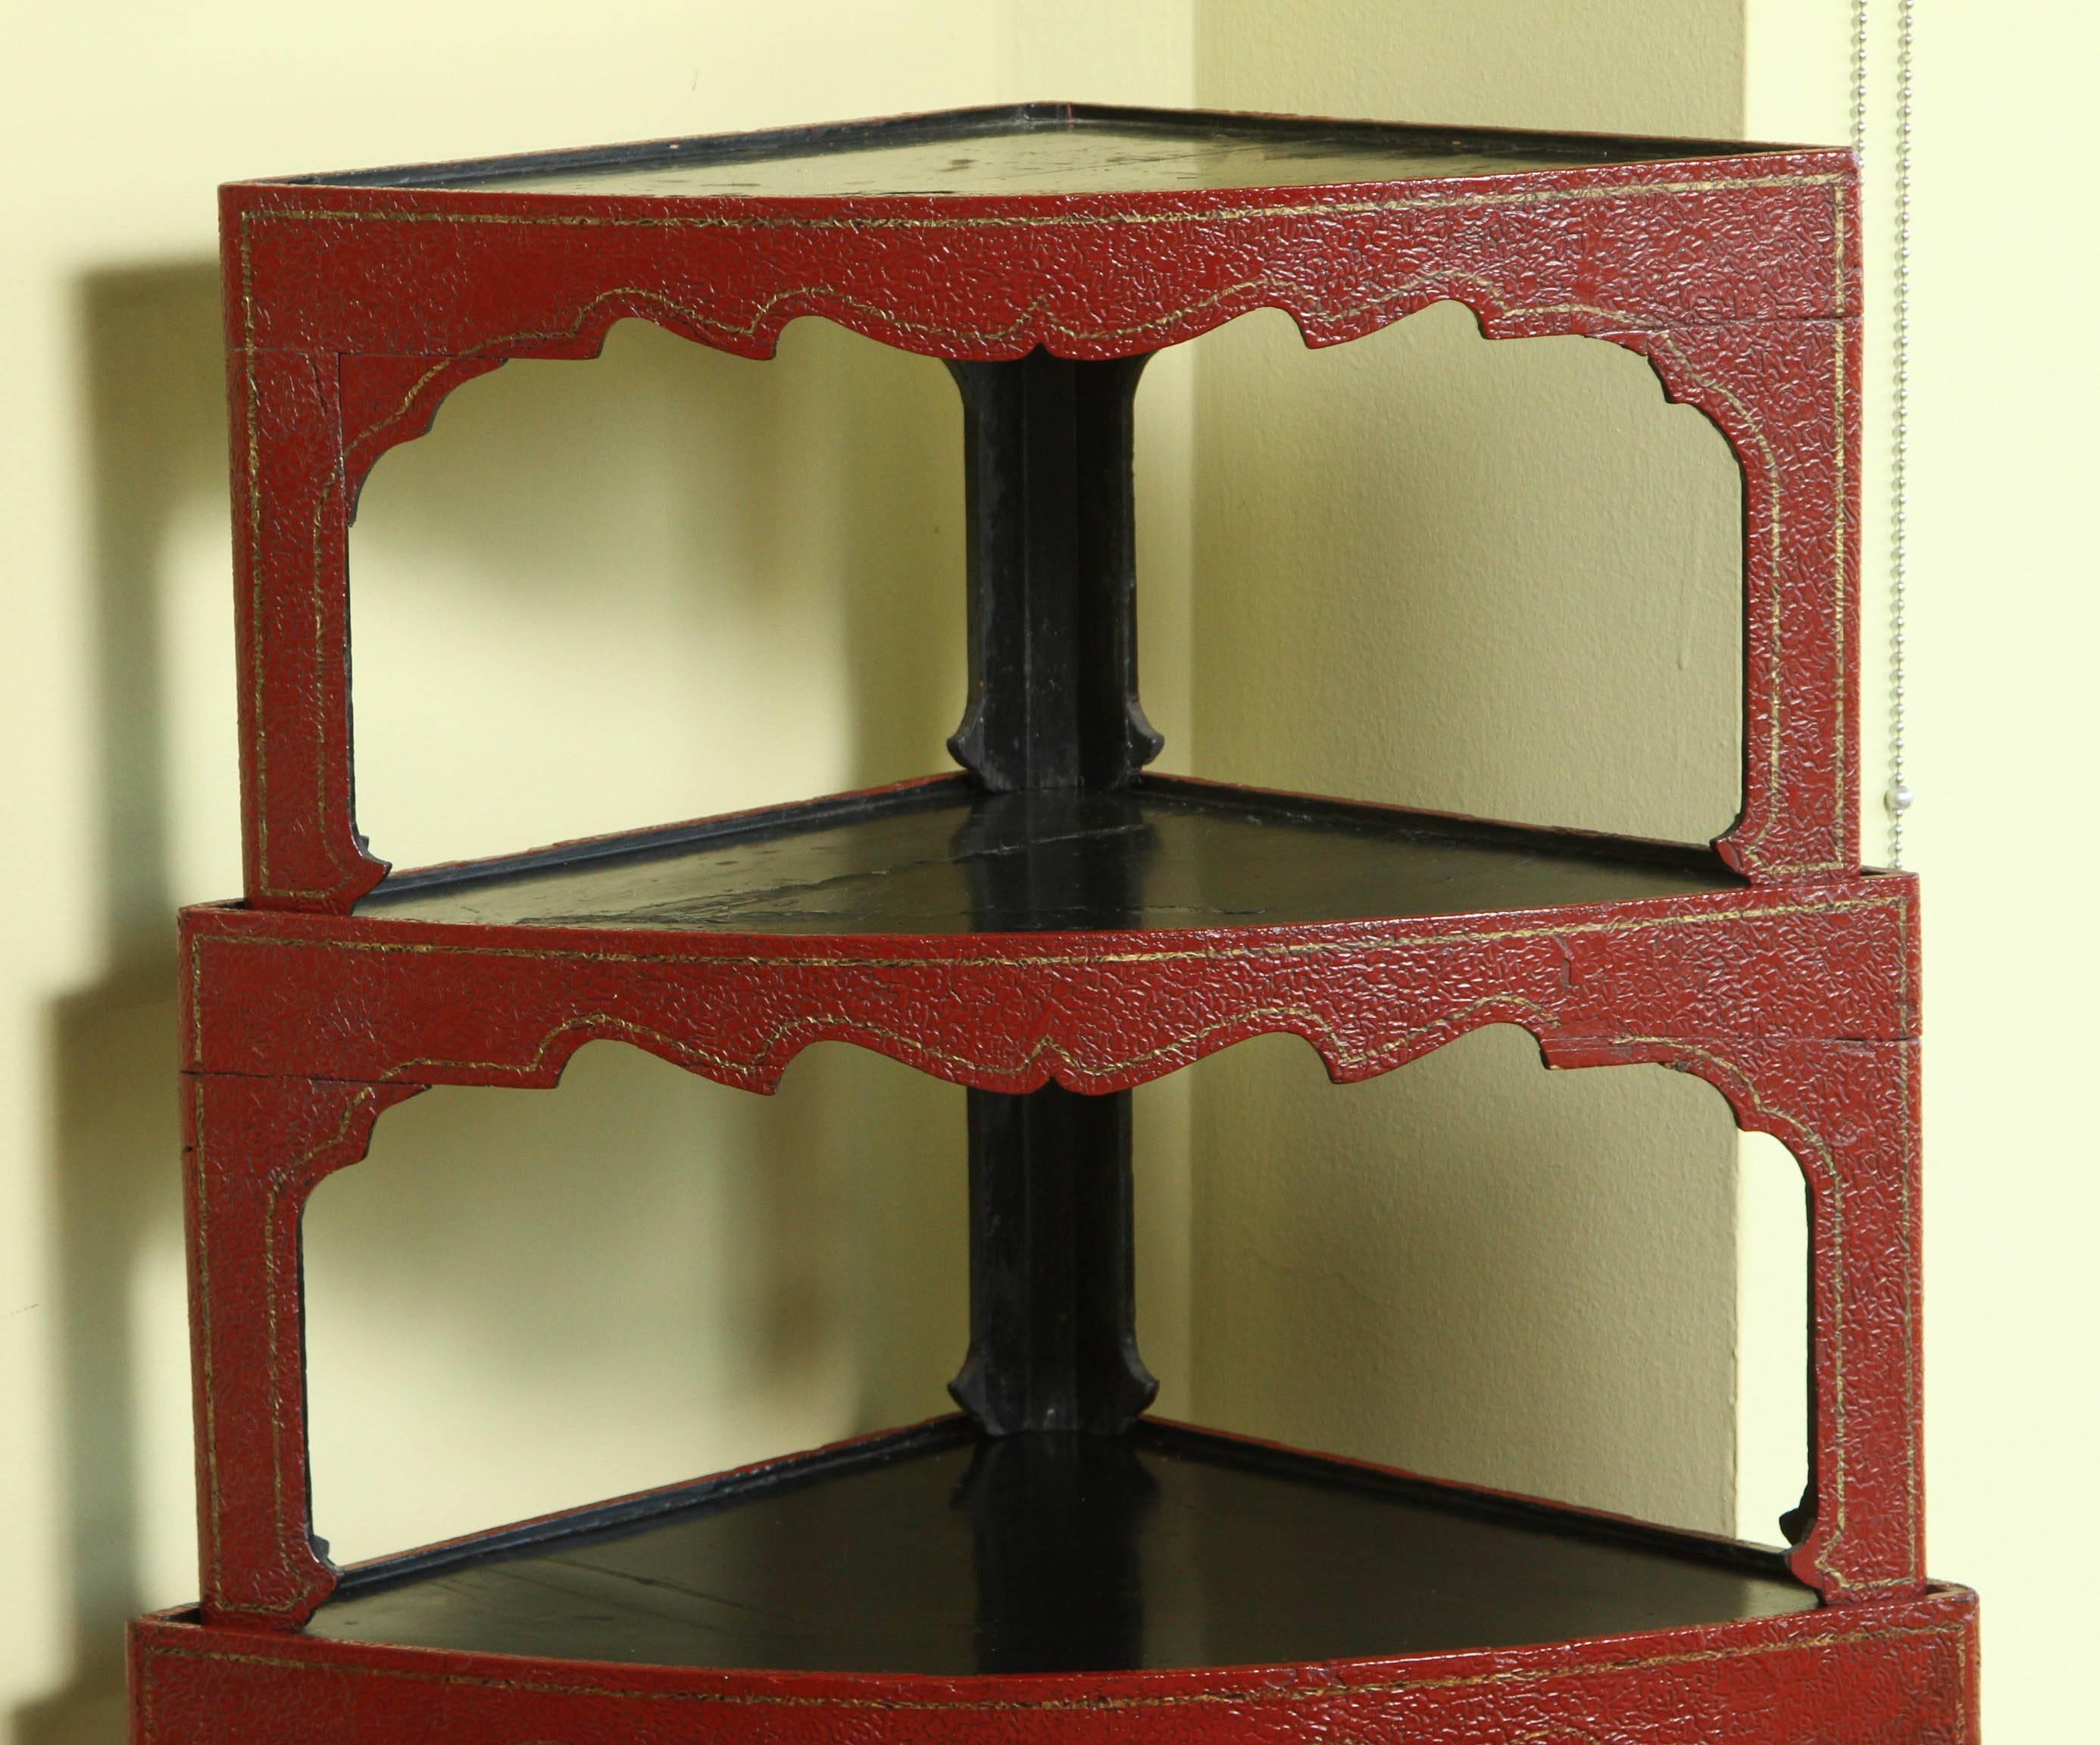 A set of five Japanese corner nesting tables in red lacquer with a gilt line, 19th century. A set of five is very difficult to find!